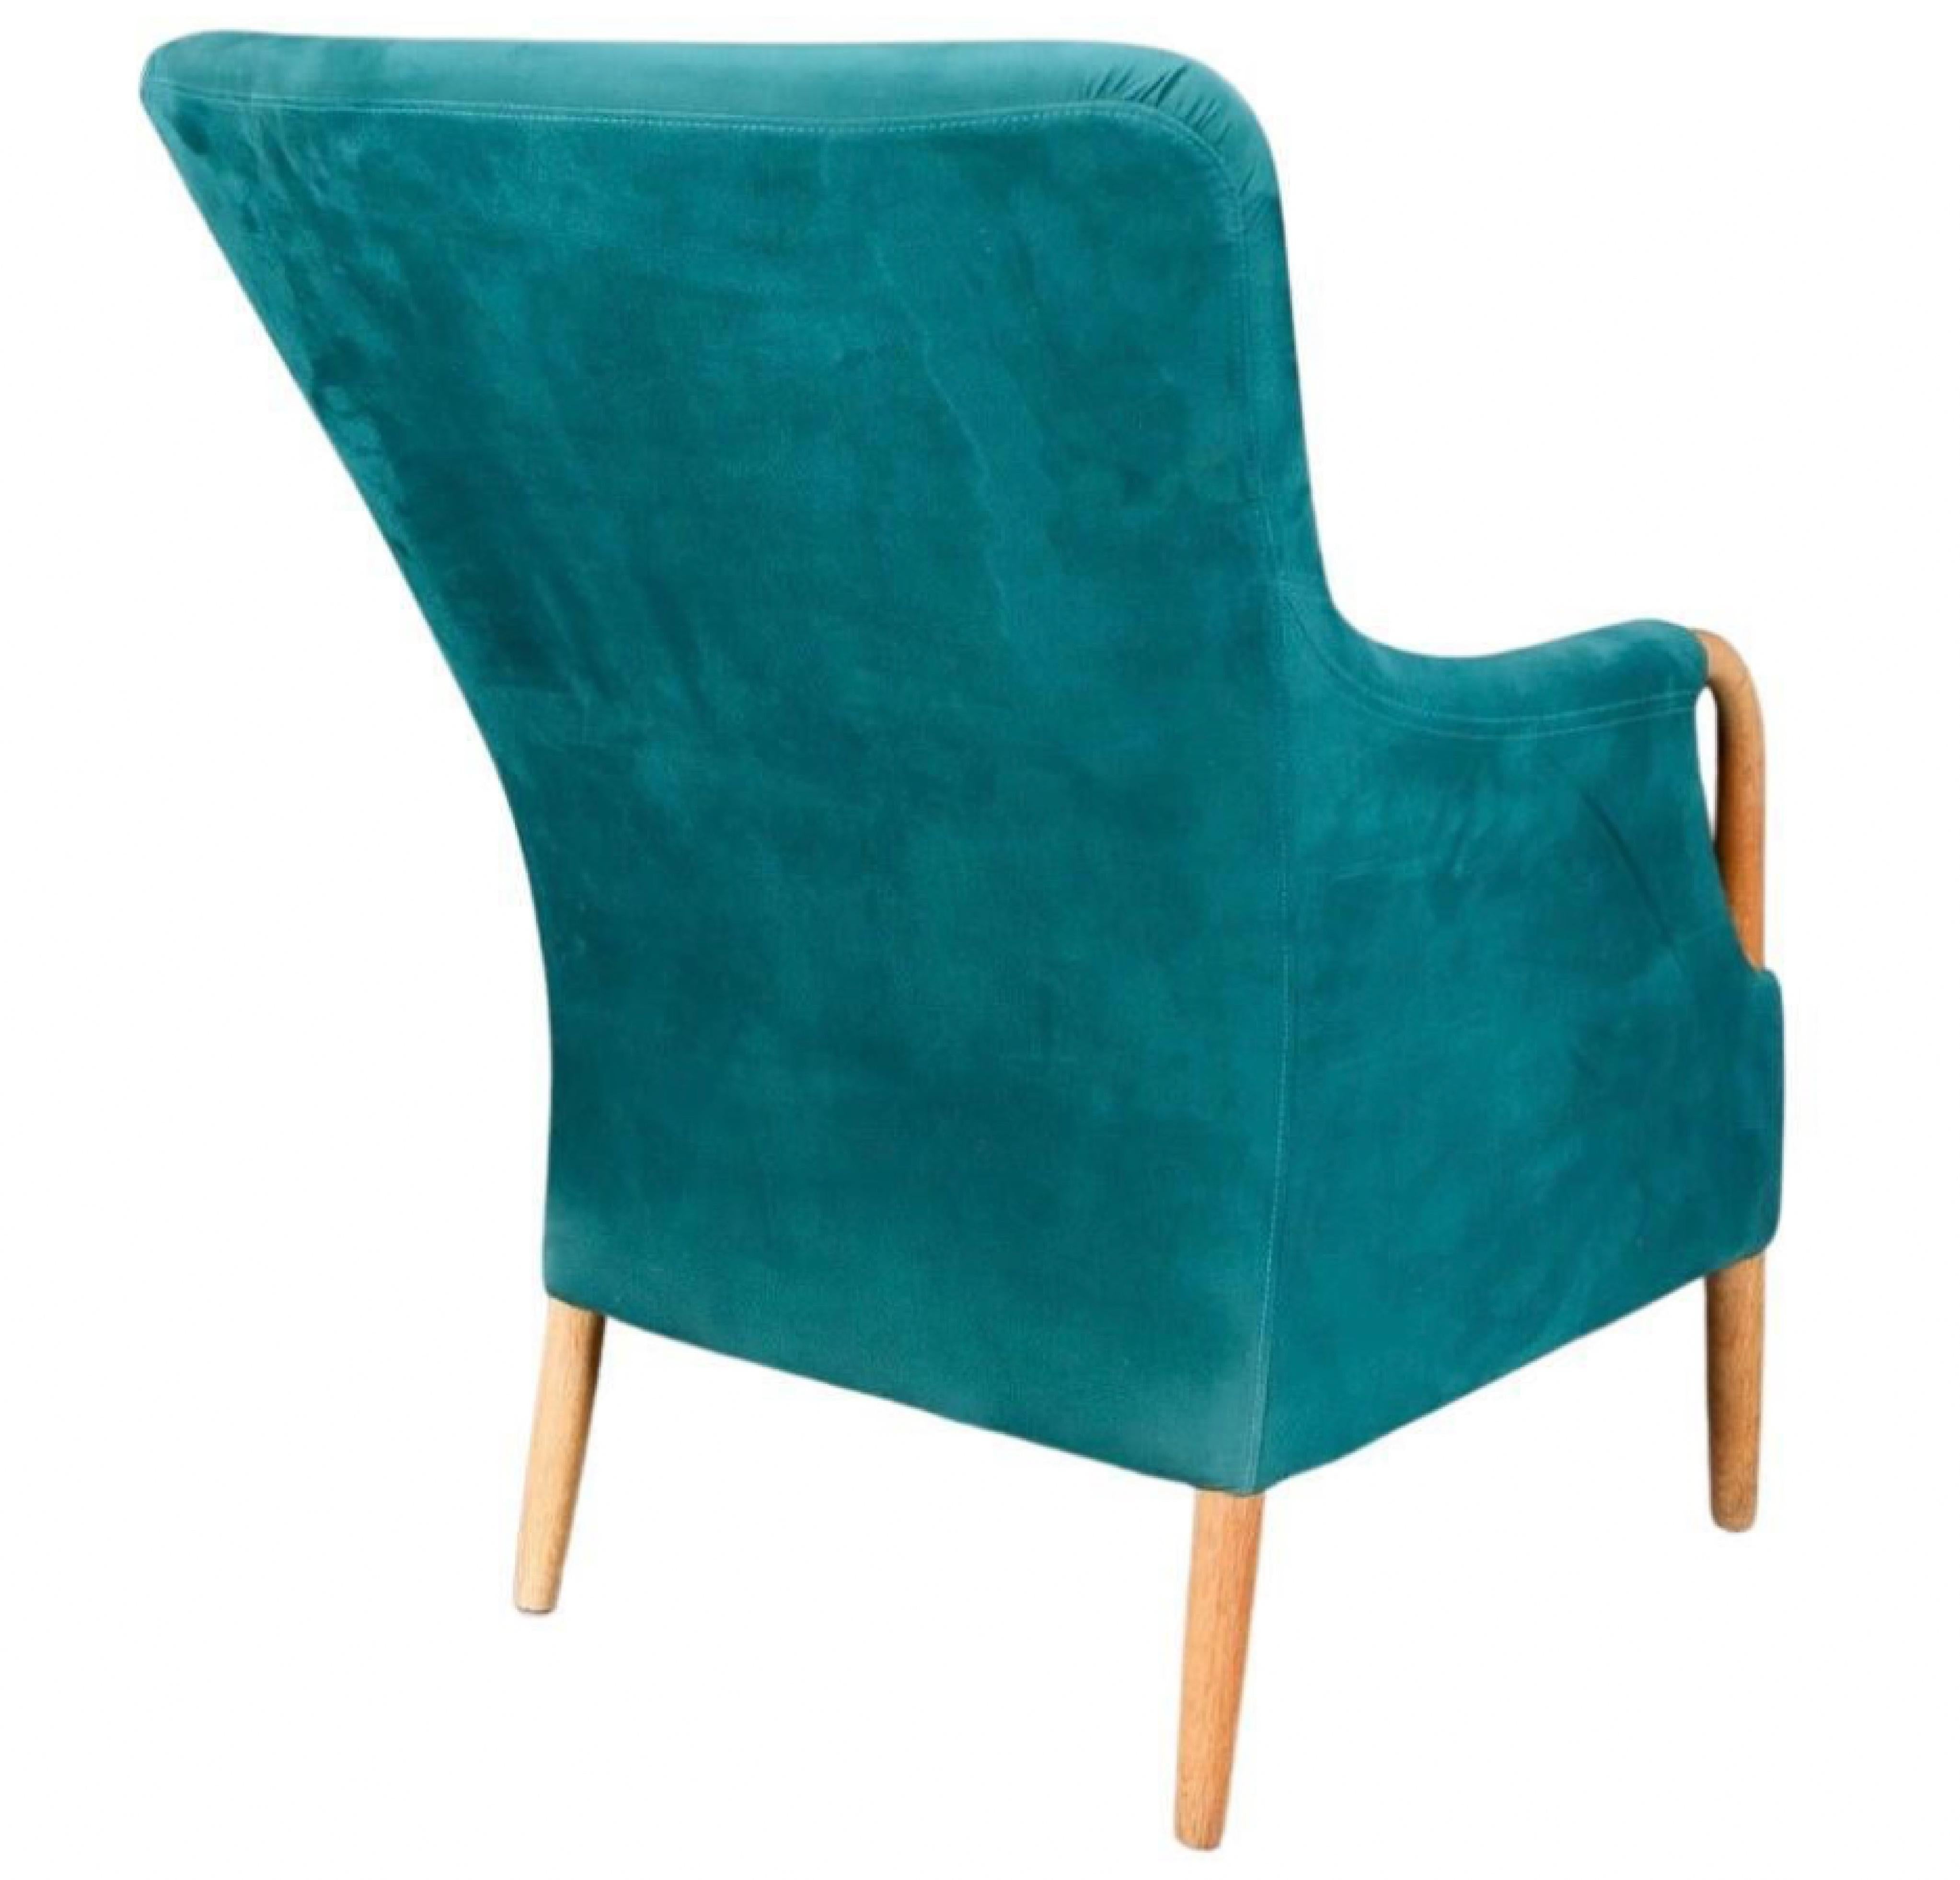 Classic armchair by Danish designers Ebbe Gehl & Søren Nissen.

Designet in the 1970s and

Solid oak upholstered with alcantara.

Made by Nielaus/Jeki furniture.



Gently and expertly refinished to highest standard. Excellent